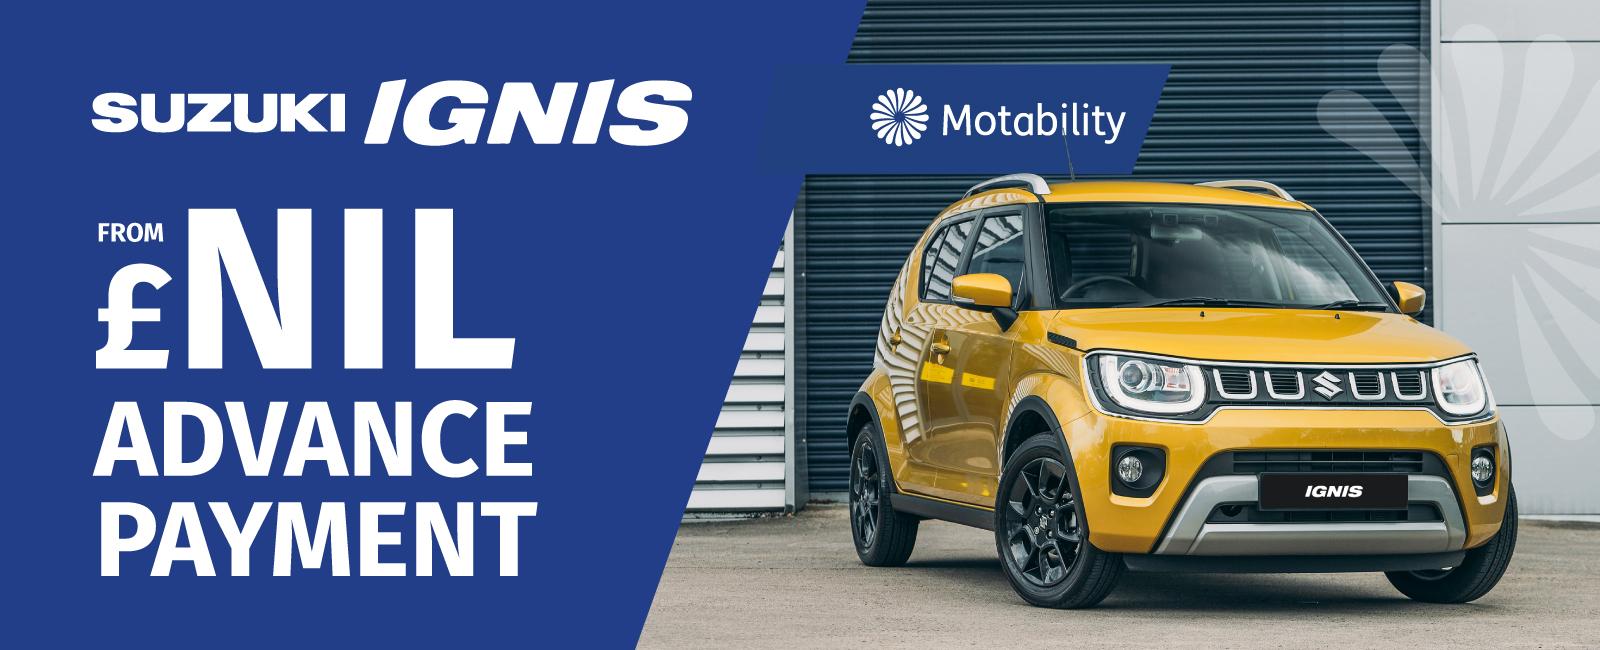 The Suzuki Ignis on the Motability Scheme from £NIL Advance Payment